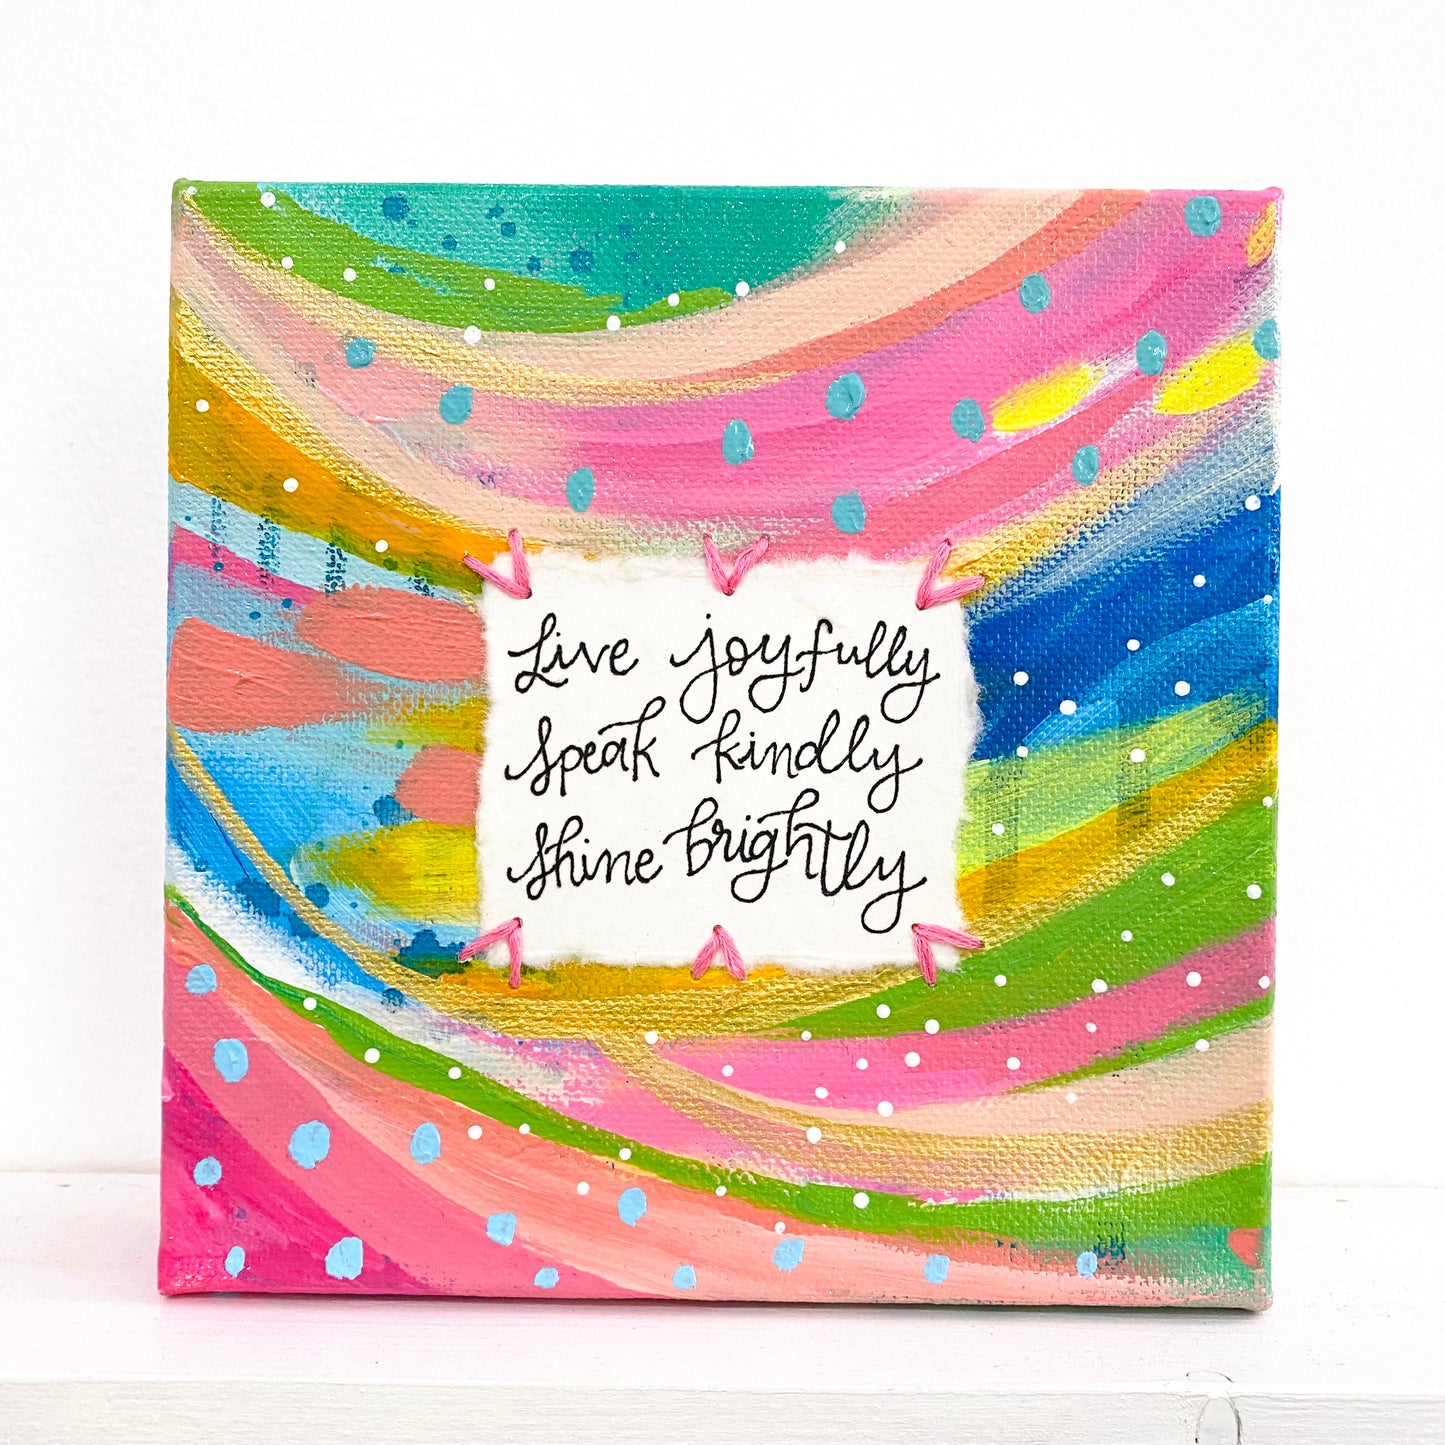 Live, Speak, Shine 6x6 inch original abstract canvas with embroidery thread accents